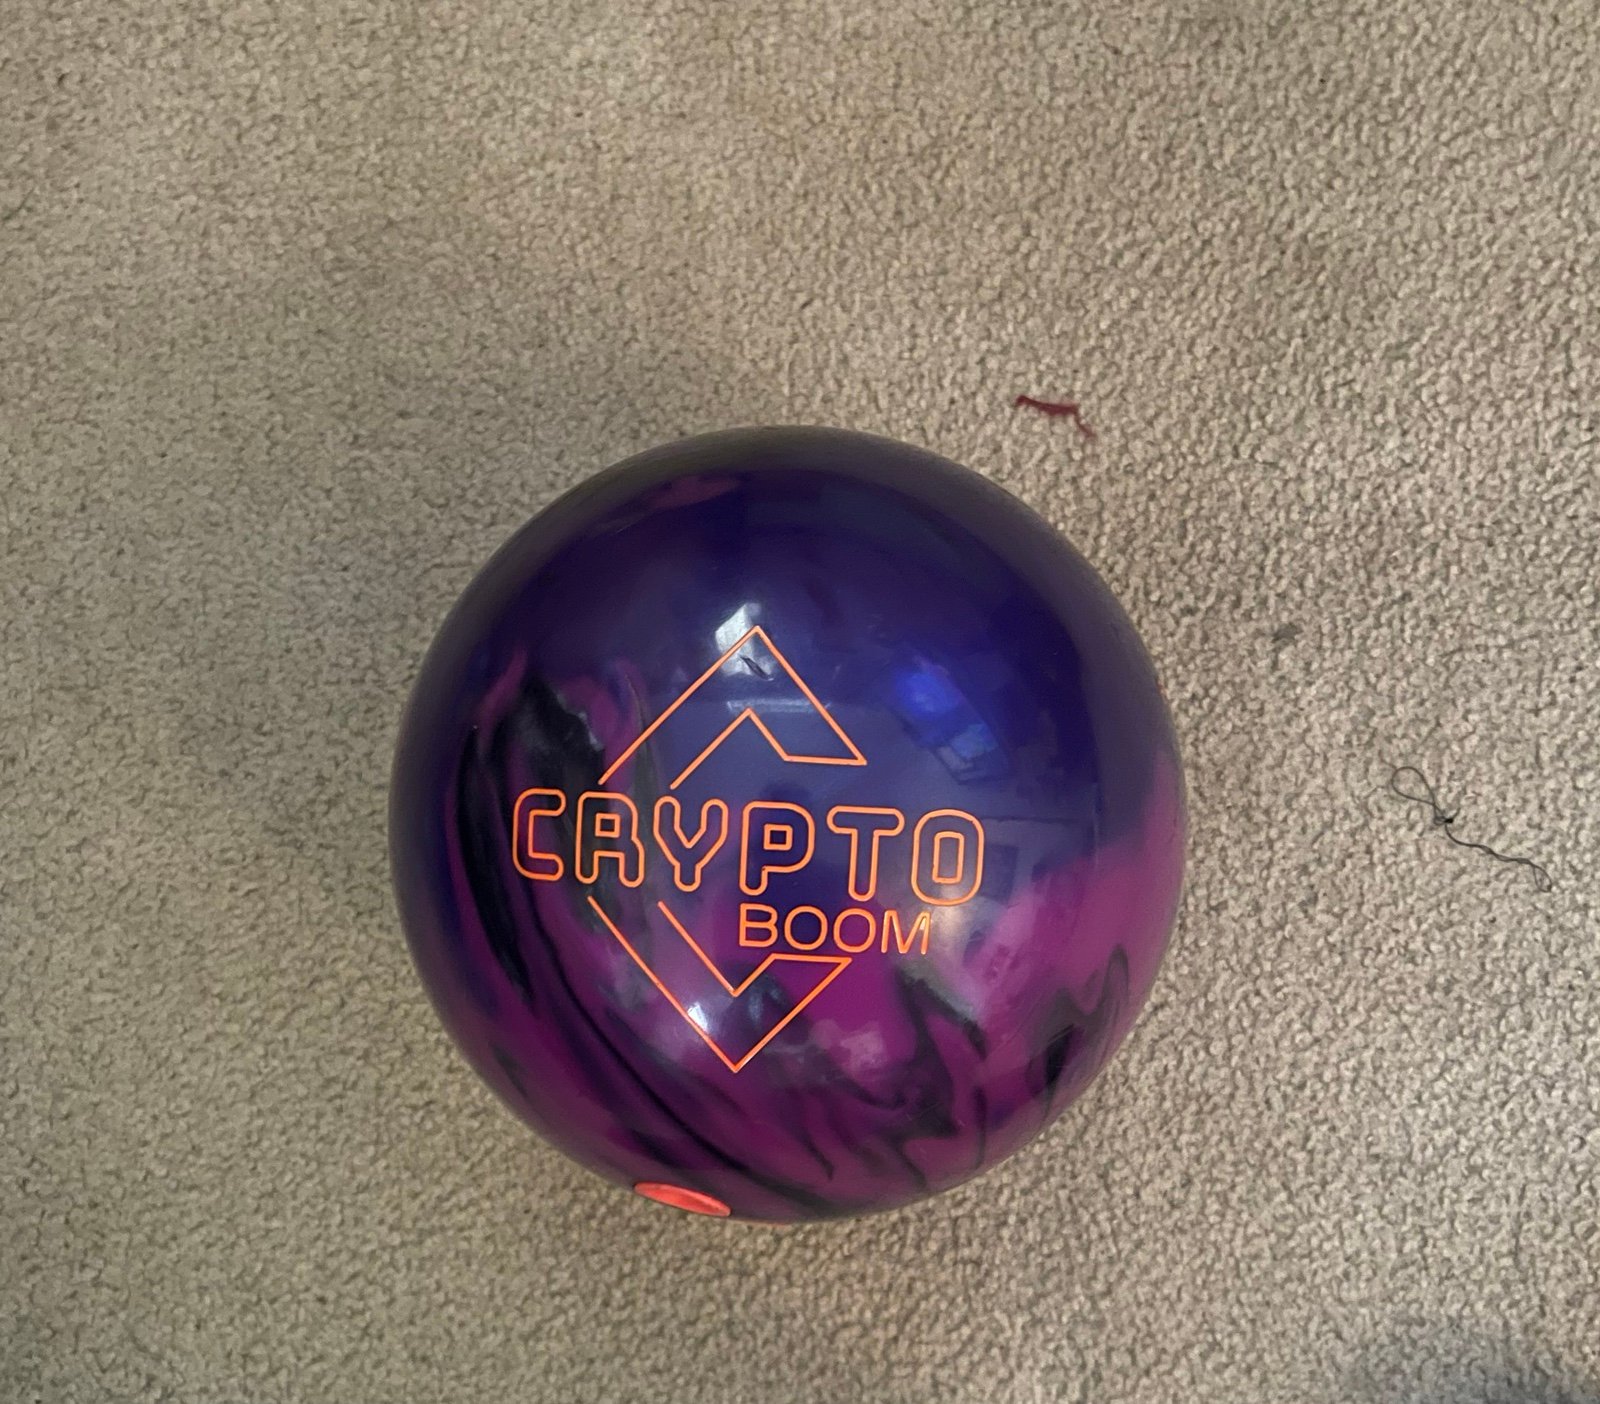 Crypto boom bowling ball pgpO4Udm7